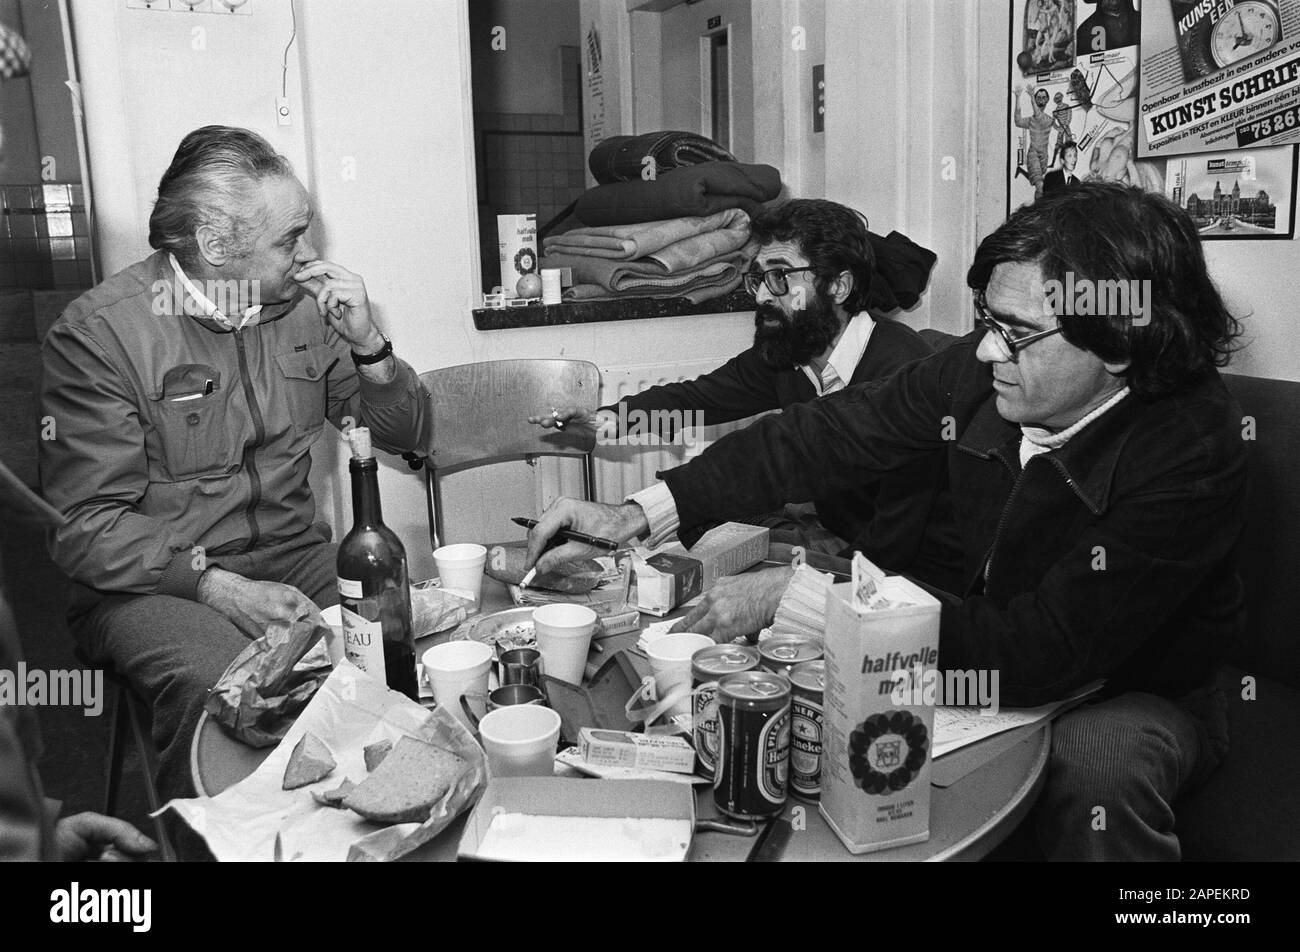 Institute of Social Sciences in Amsterdam occupied Description: Occupied occupiers around a crowded table Date: 19 December 1979 Location: Amsterdam, Noord-Holland Keywords: officials, occupations, students, tables, scientific education Stock Photo